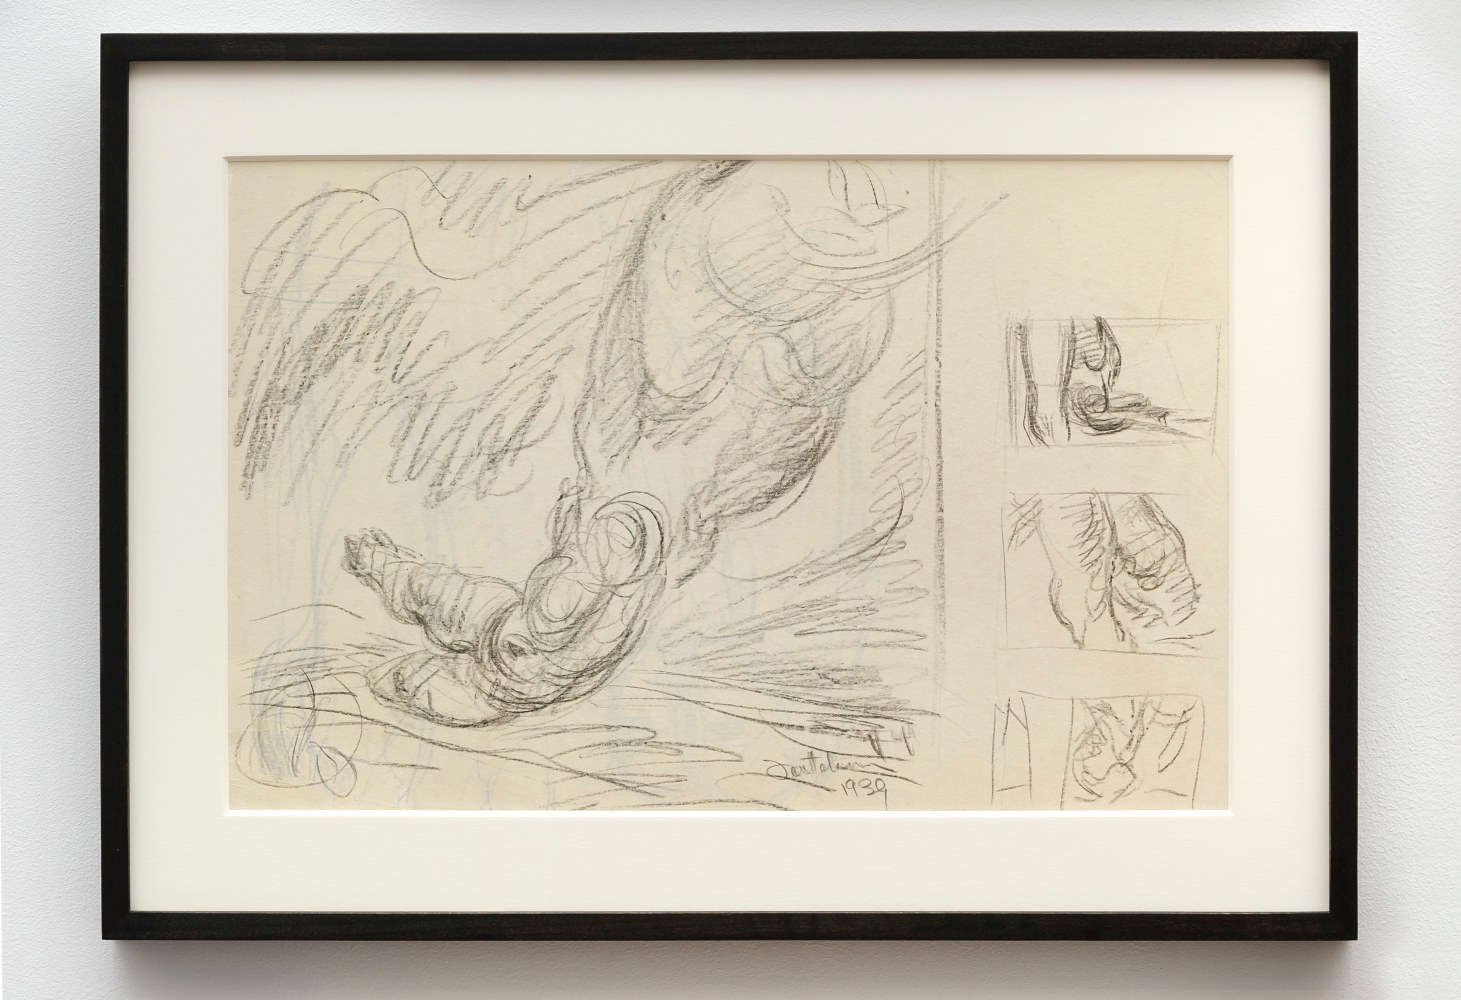 Lorser Feitelson (1898-1978) Untitled Study, 1939 graphite on paper 11 1/2 x 17 3/4 inches; 29.2 x 45.1 centimeters LSFA# 13850